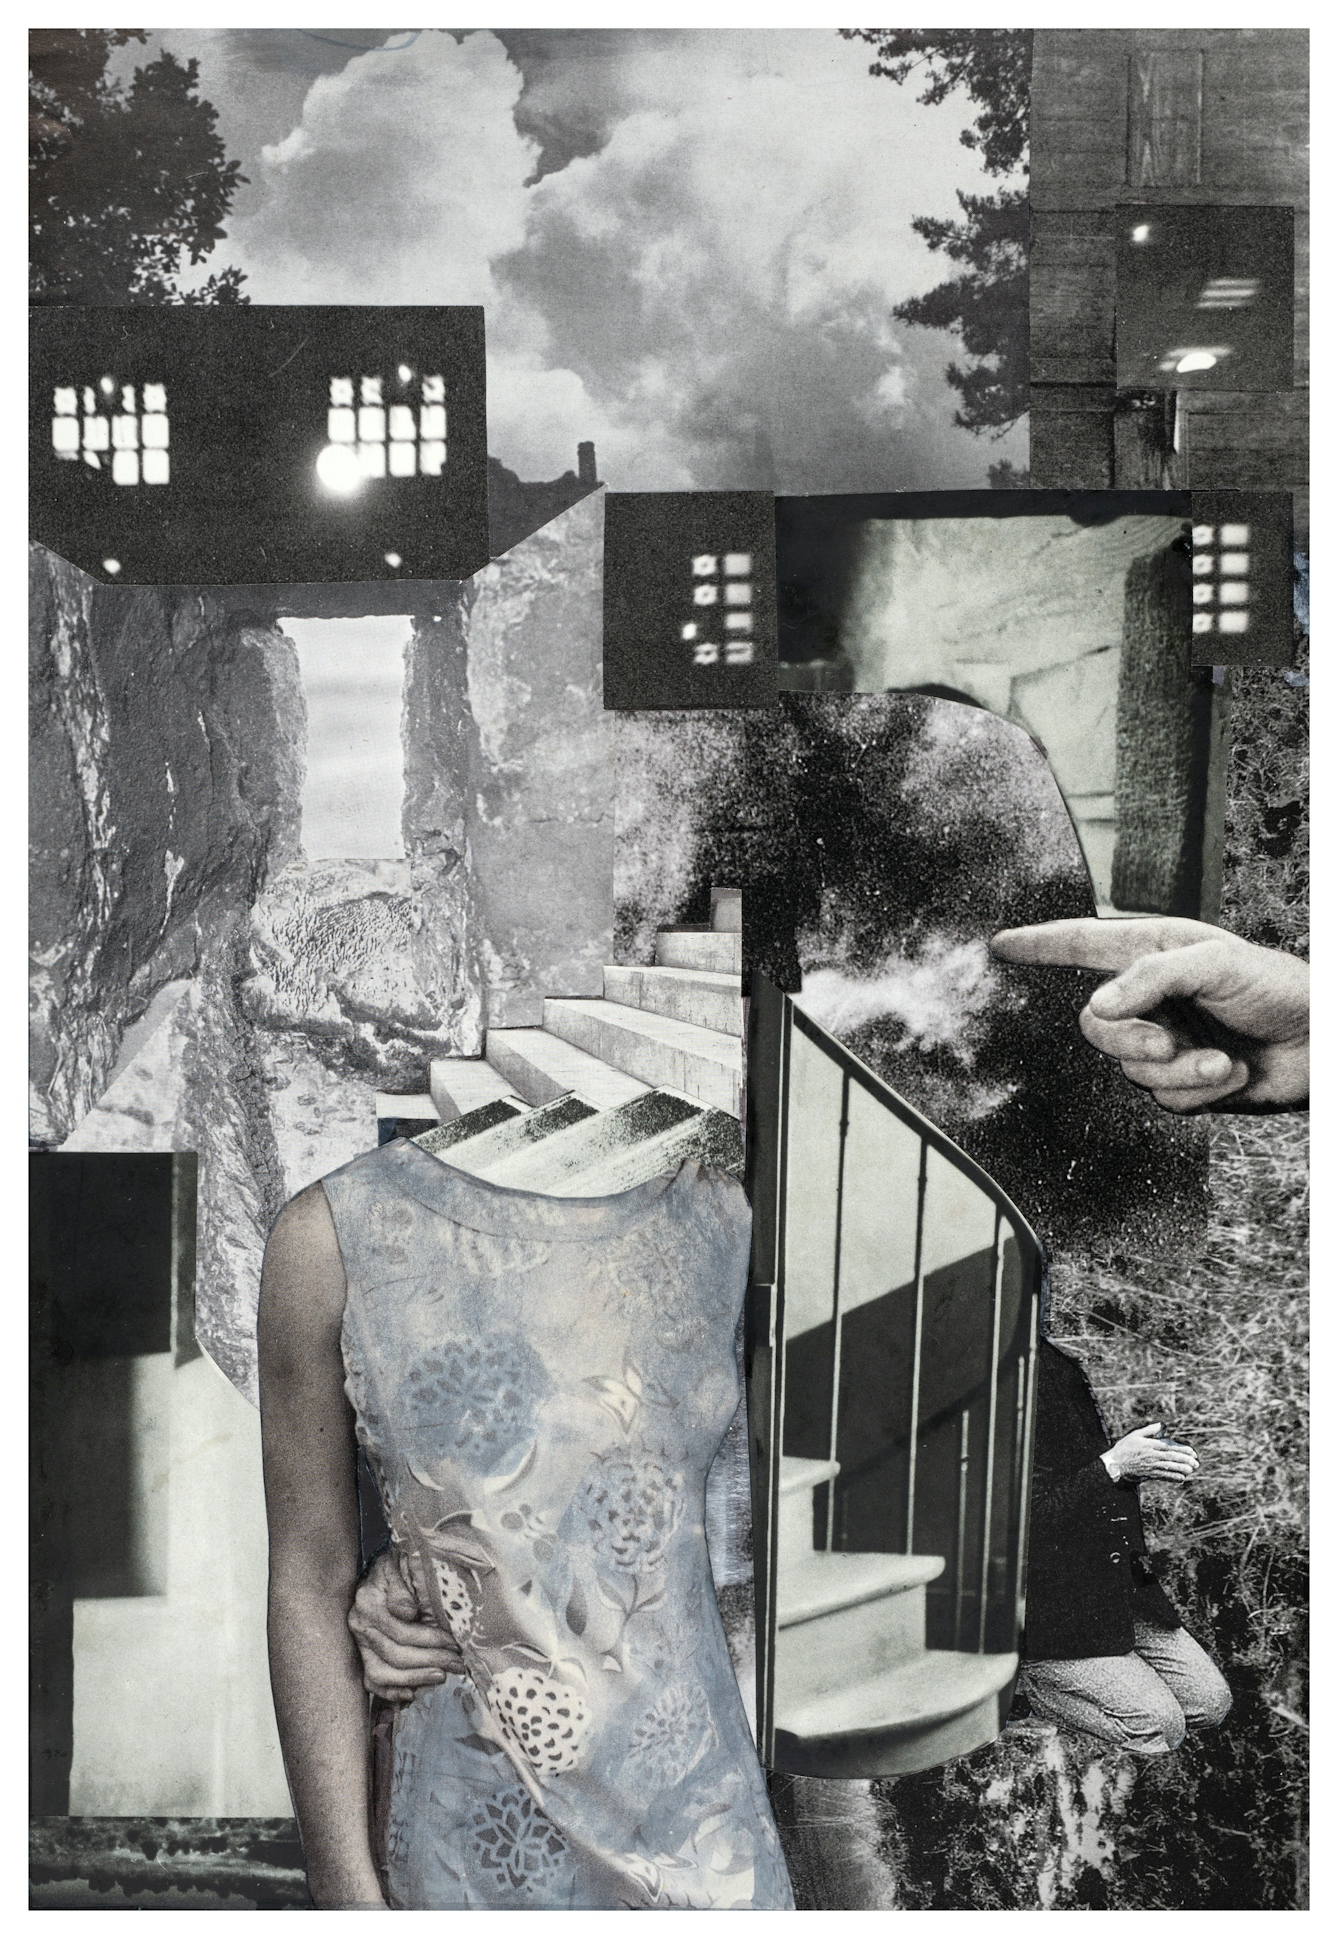 Photographic collage using images cut out from magazines and books. The scene depicts a woman's torso wearing a sleeveless floral dress. Her head and neck line have been cut out. Behind her are a couple of staircases leadings to nowhere. To the right of the woman is a hand entering the frame from the right, pointing a finger directly at where her head should have been. In the bottom right corner is the faceless figure of a man kneeling with his hands held together as if in prayer. The background of the scene is made up of fragments of buildings, windows, tree leaves and a heavy cloudy sky. The overall tones of the collage are monotone, blacks, whites and greys.